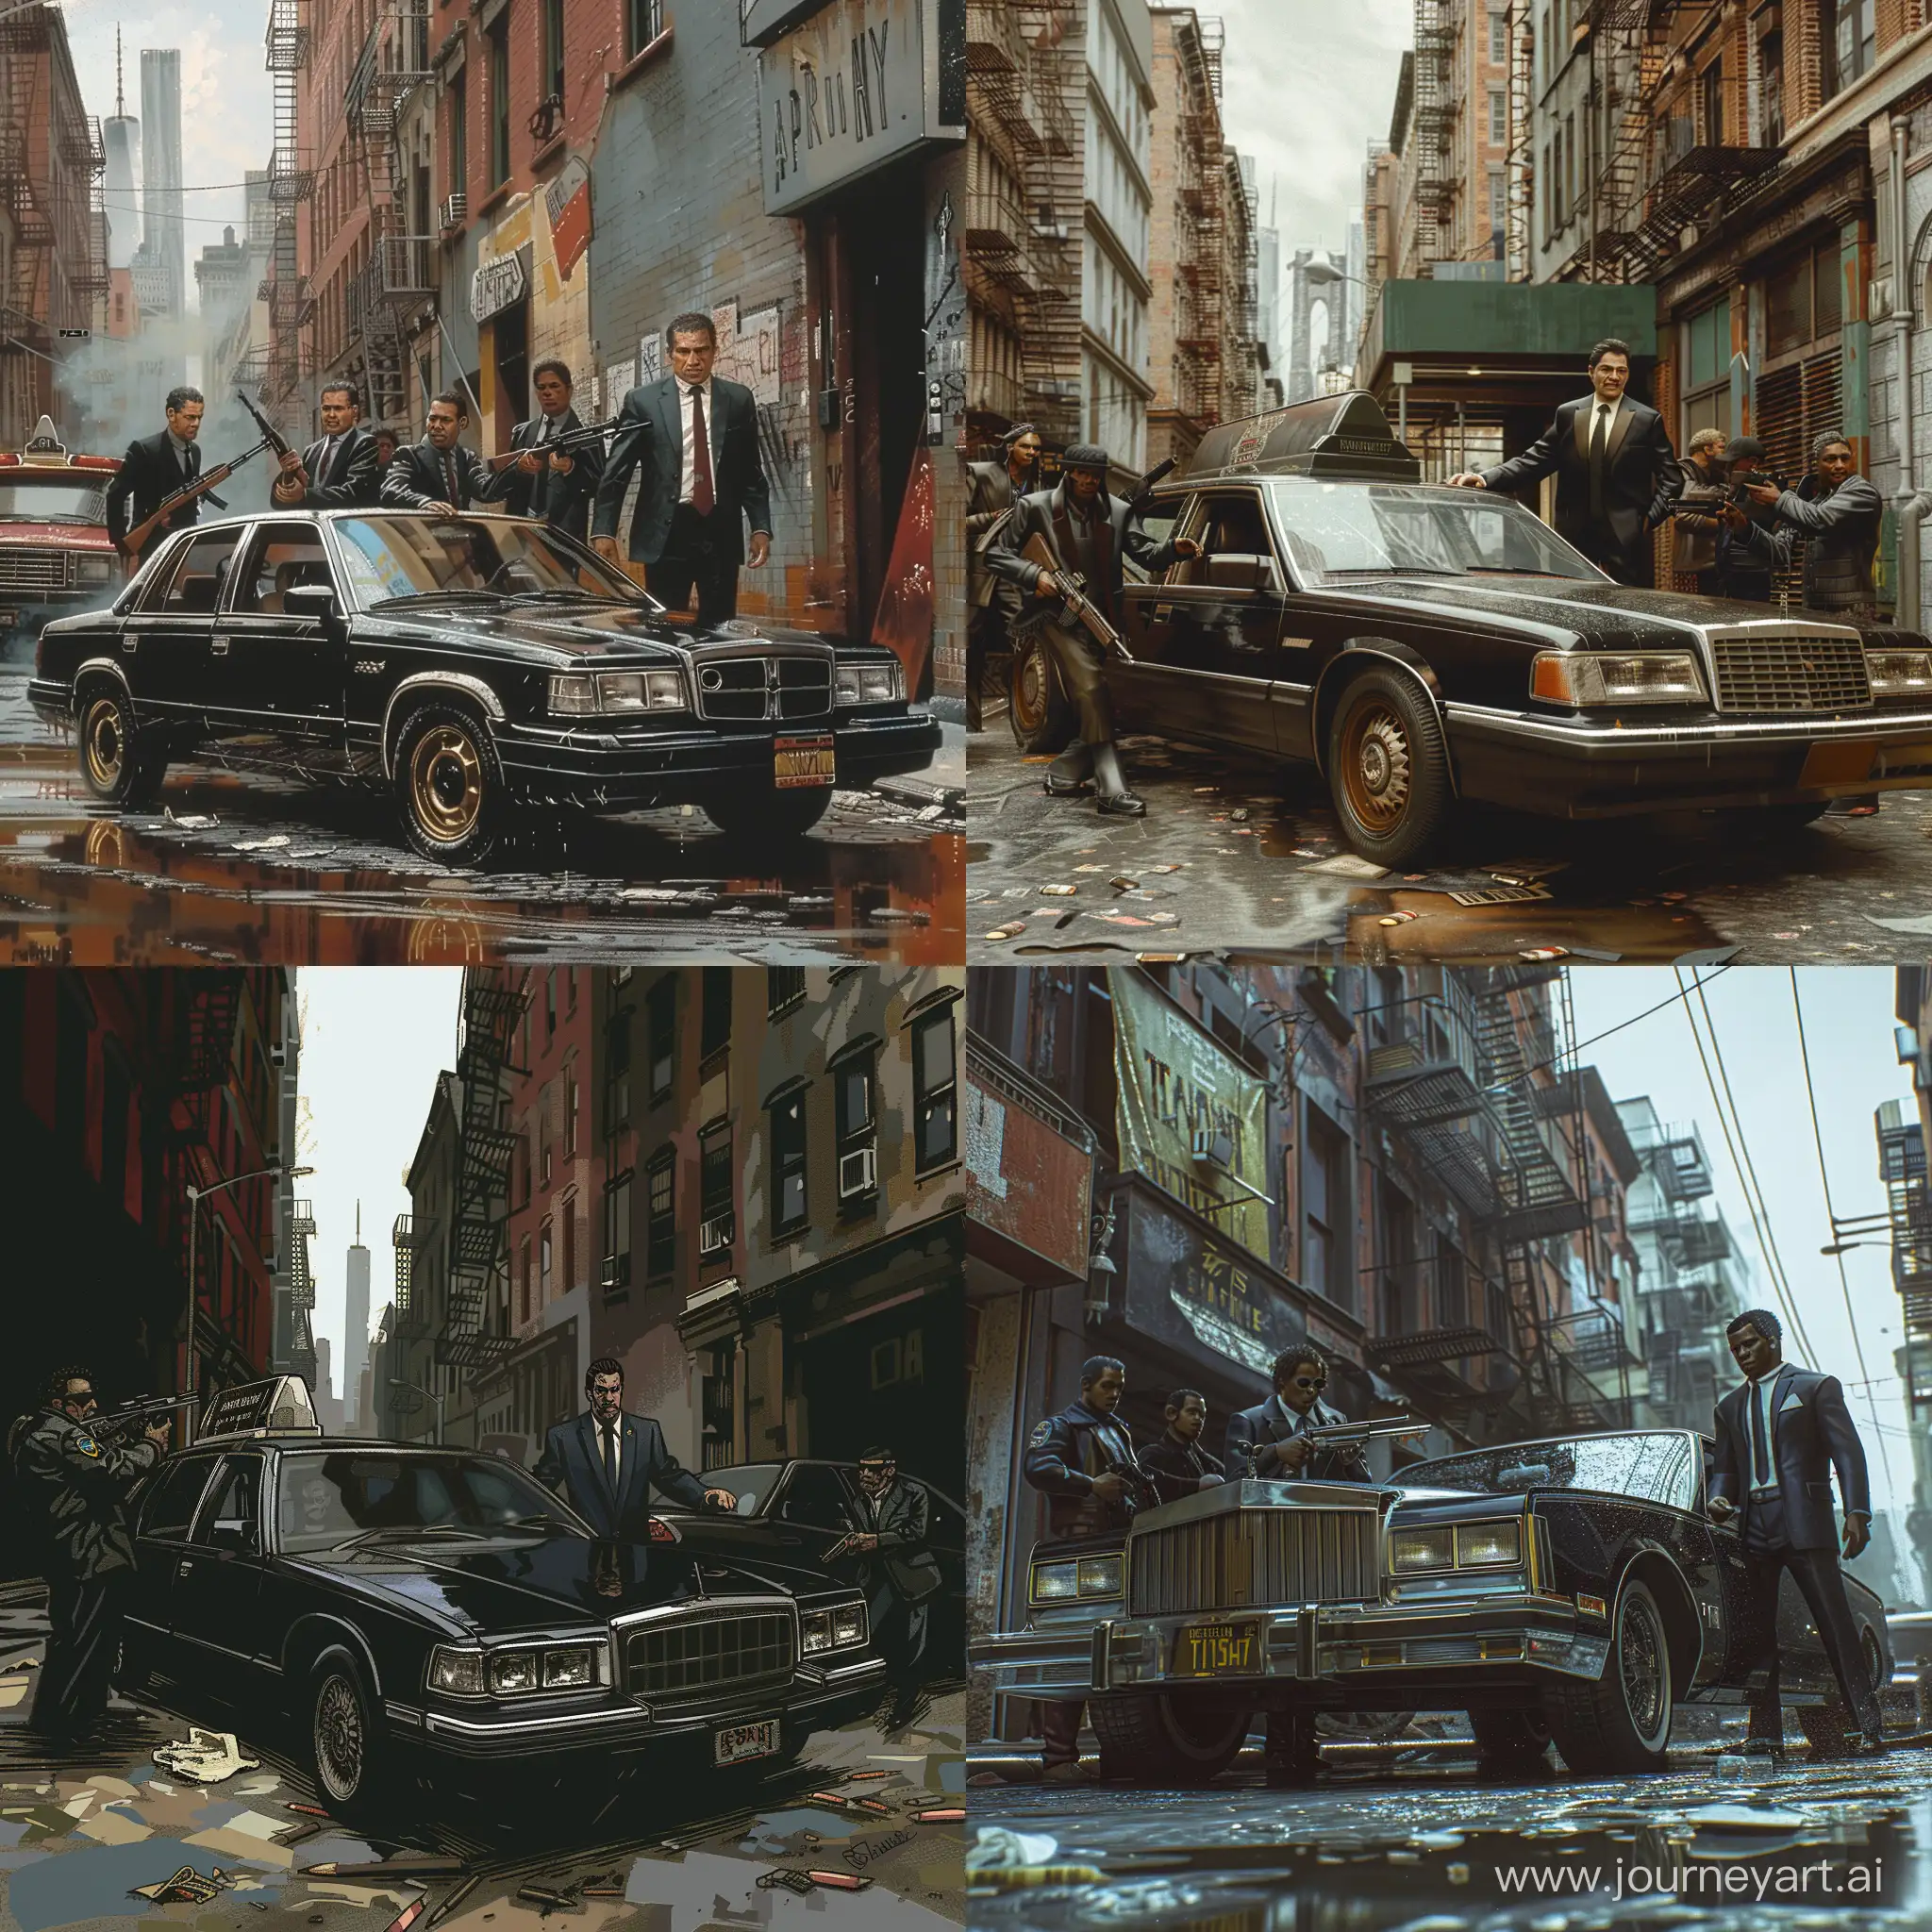 Gang-Leader-and-Bandits-Amidst-Gritty-90s-New-York-Street-Scene